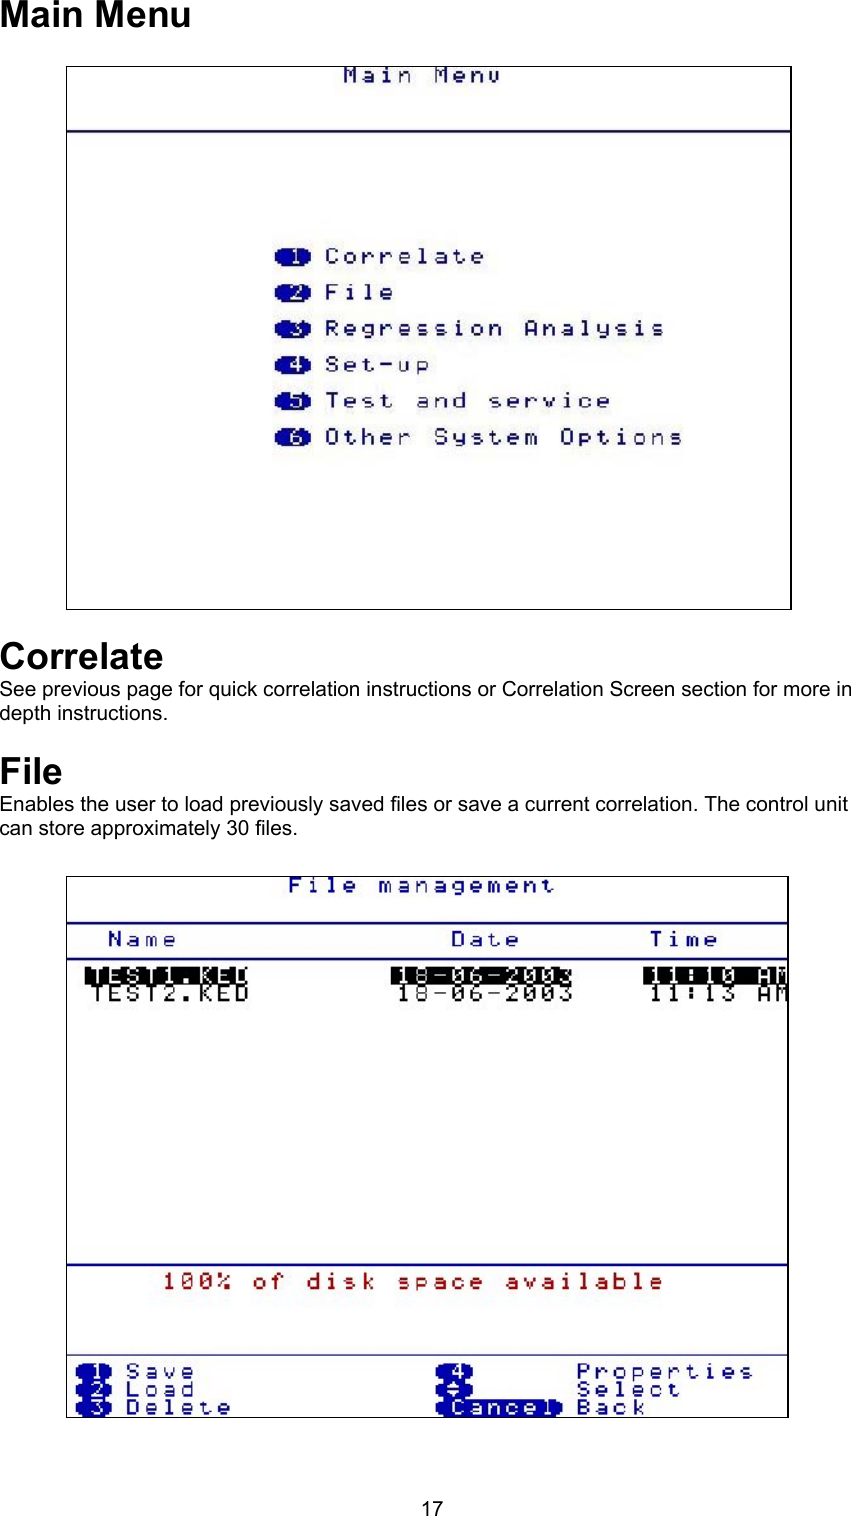 17Main MenuCorrelateSee previous page for quick correlation instructions or Correlation Screen section for more indepth instructions.File Enables the user to load previously saved files or save a current correlation. The control unitcan store approximately 30 files.